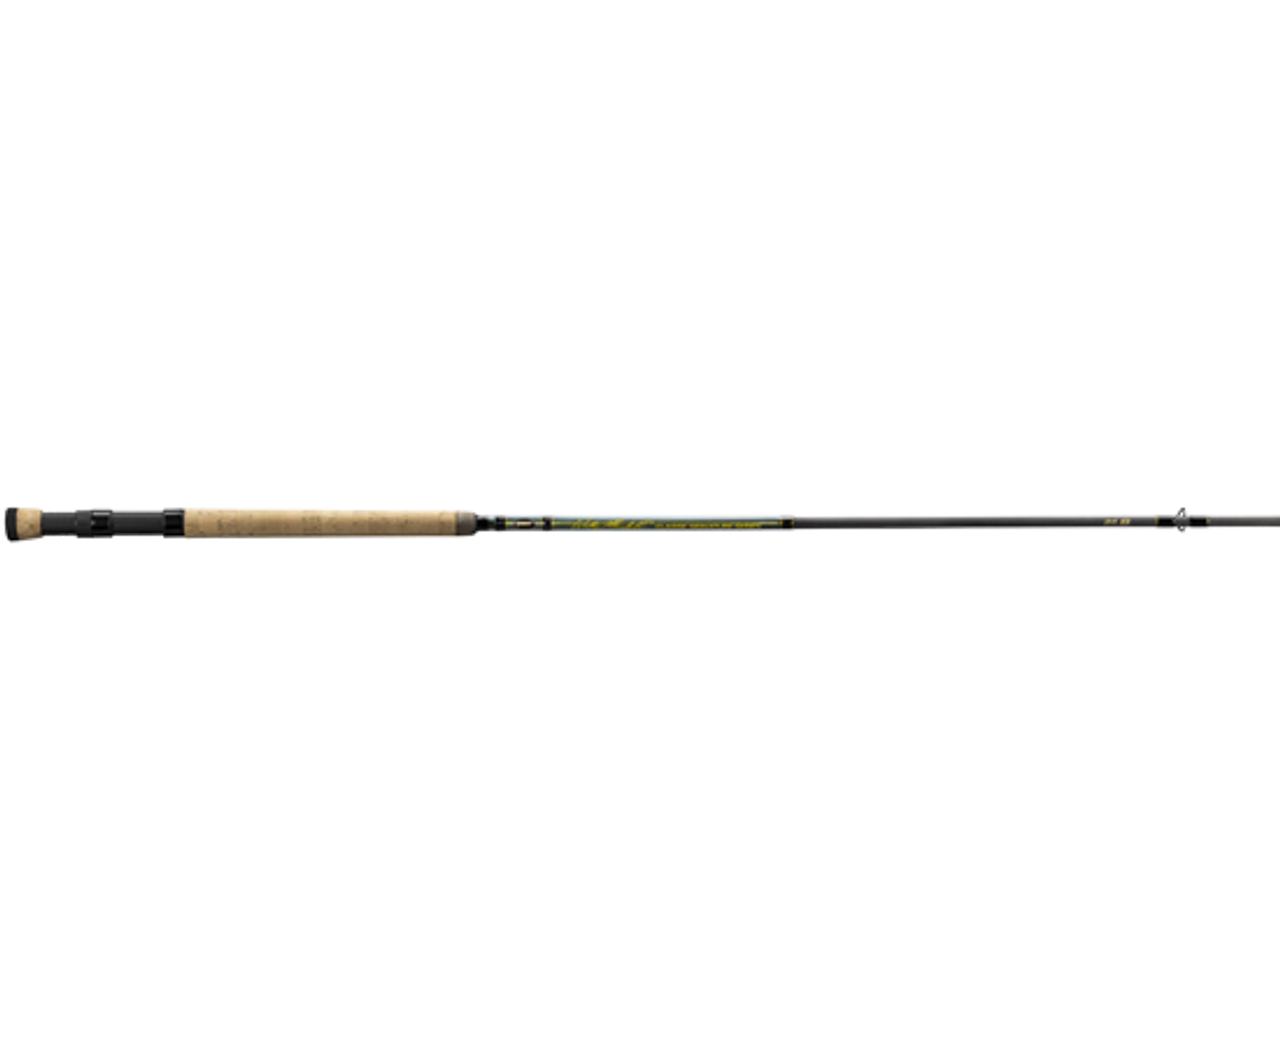 Crappie Wally Marshall Classic Signature Crappie Rod 11' ML, 52% OFF